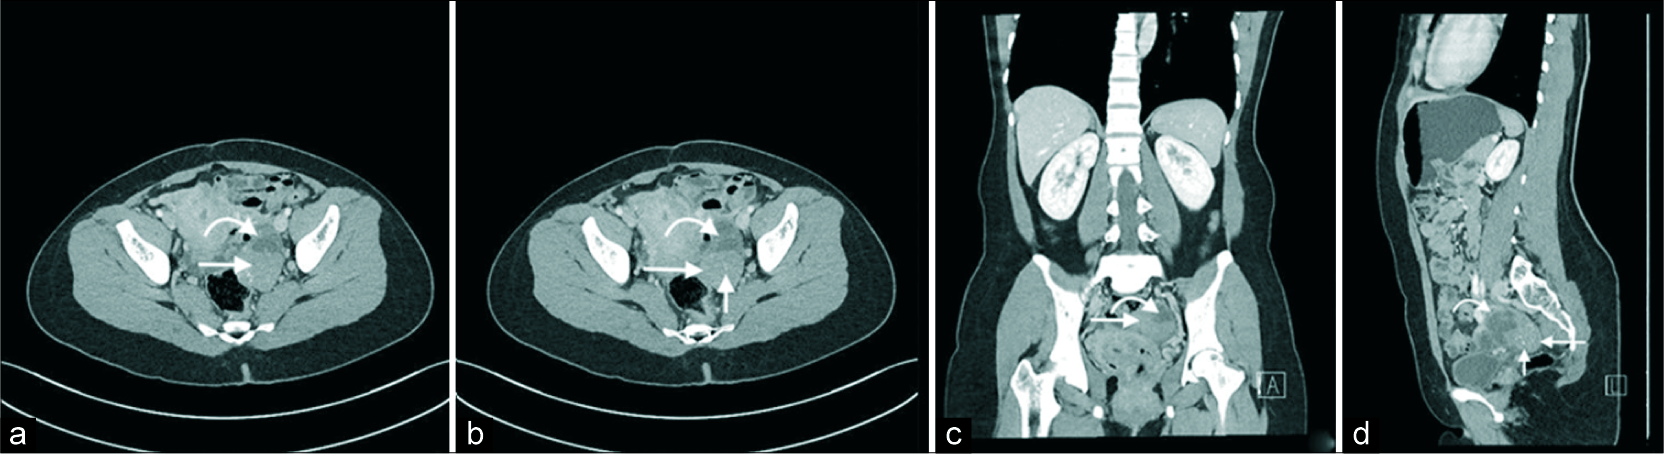 A 40-year-old female with an incidental left adnexal lesion on ultrasound underwent subsequent computed tomography (CT) imaging. Axial (a and b), coronal (c), and sagittal (d) CT images demonstrate an enhancing solid (long arrow) and cystic (curved arrow) left adnexal mass with thinly septated amorphous and punctate calcifications (short arrow).